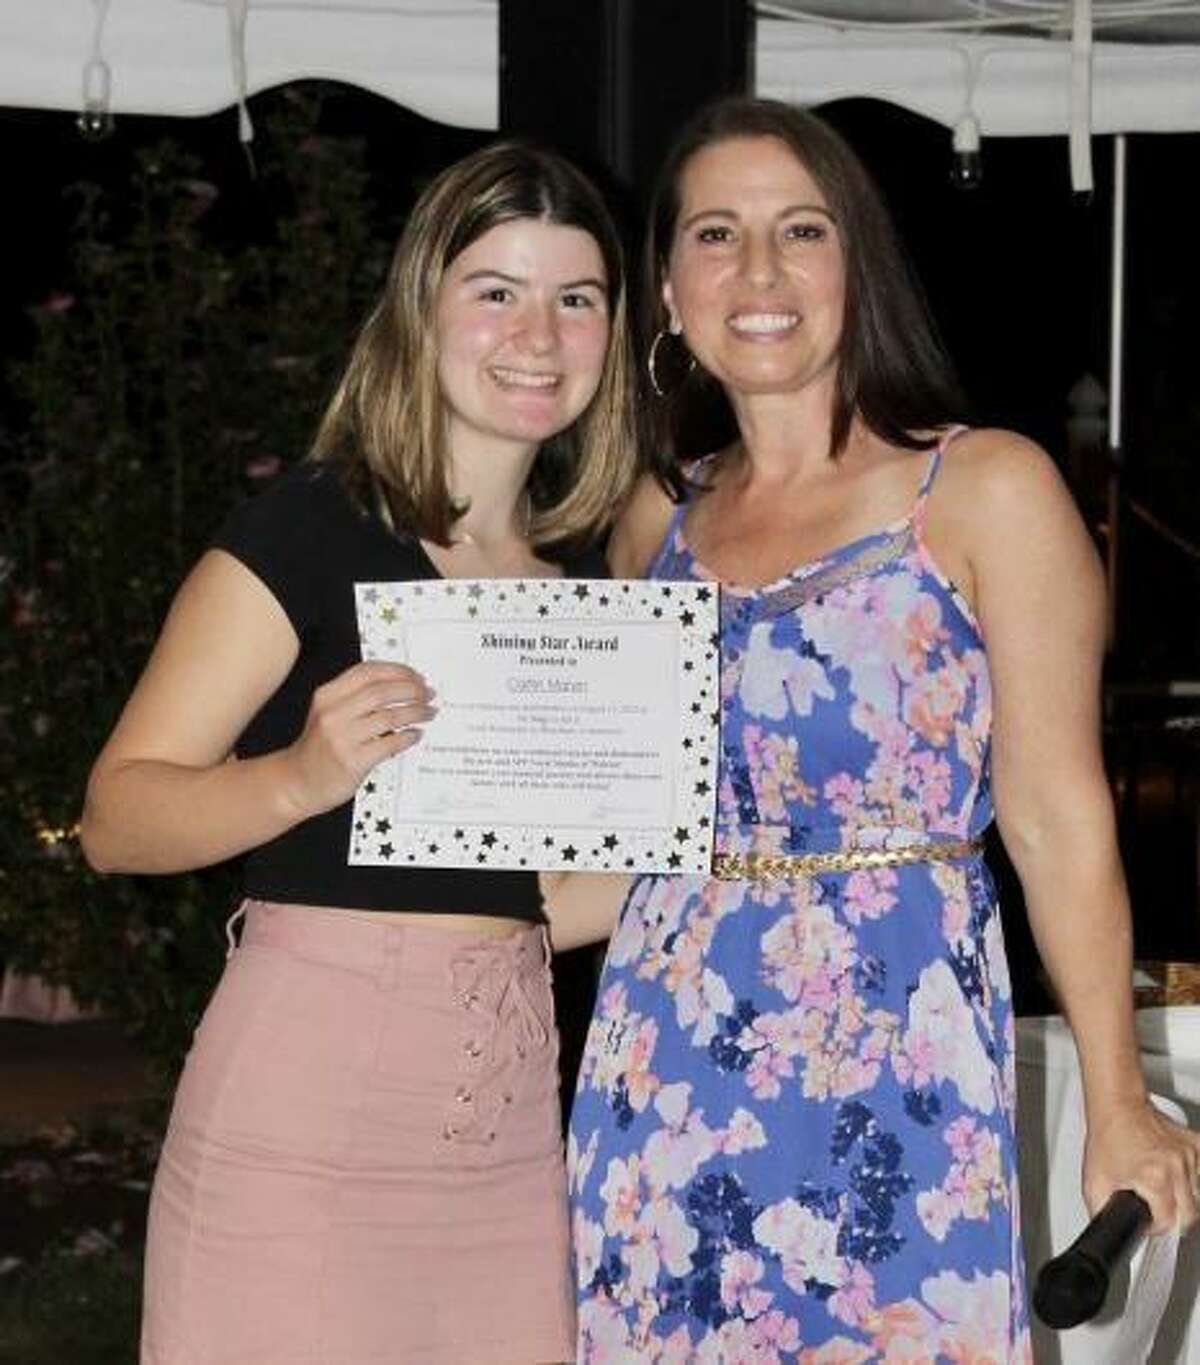 The 1st annual Maestro John M. Cosentino Award and scholarship was presented to Caitlin Marvin of Prospect by Stacy Perrone-Petta, owner and artistic director of SPP Vocal Studio in Wolcott.